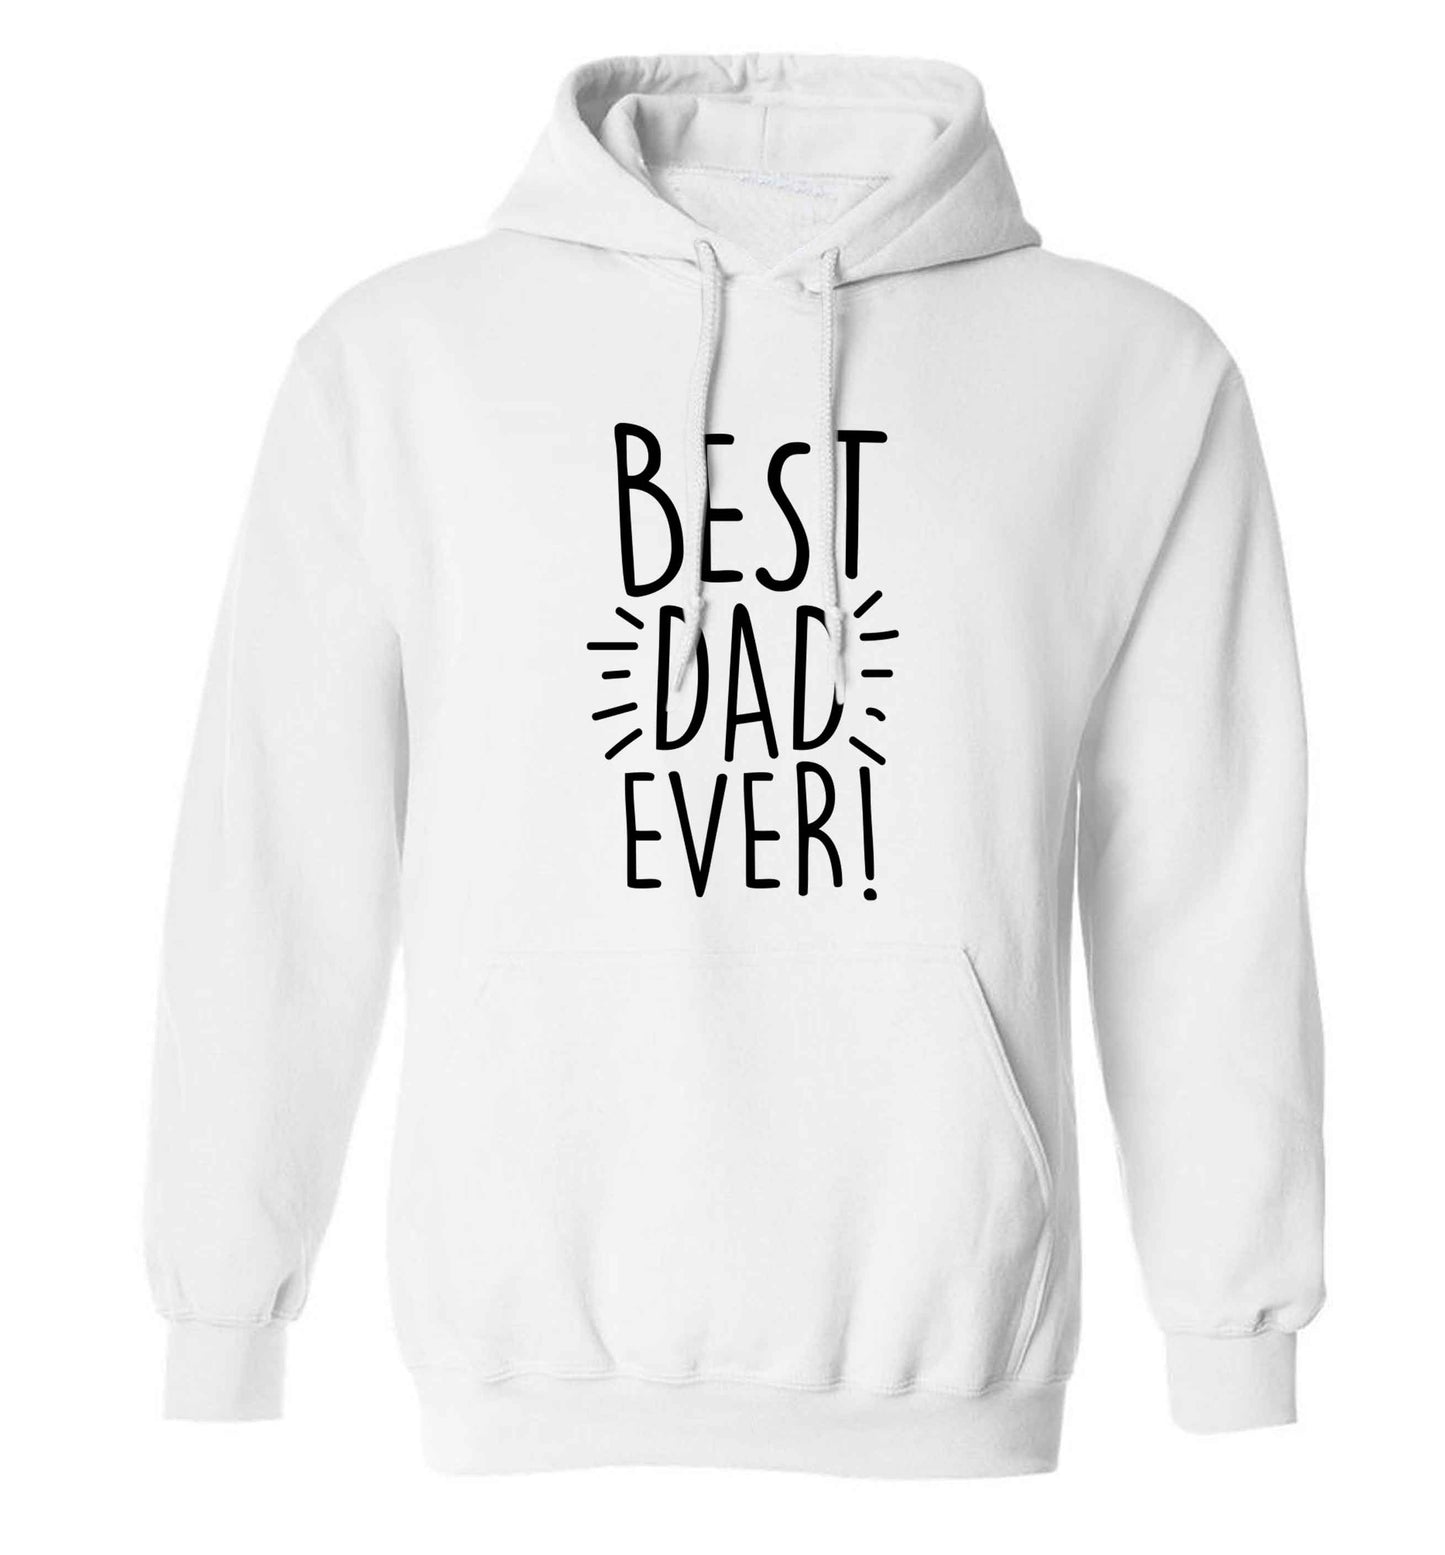 Best dad ever! adults unisex white hoodie 2XL